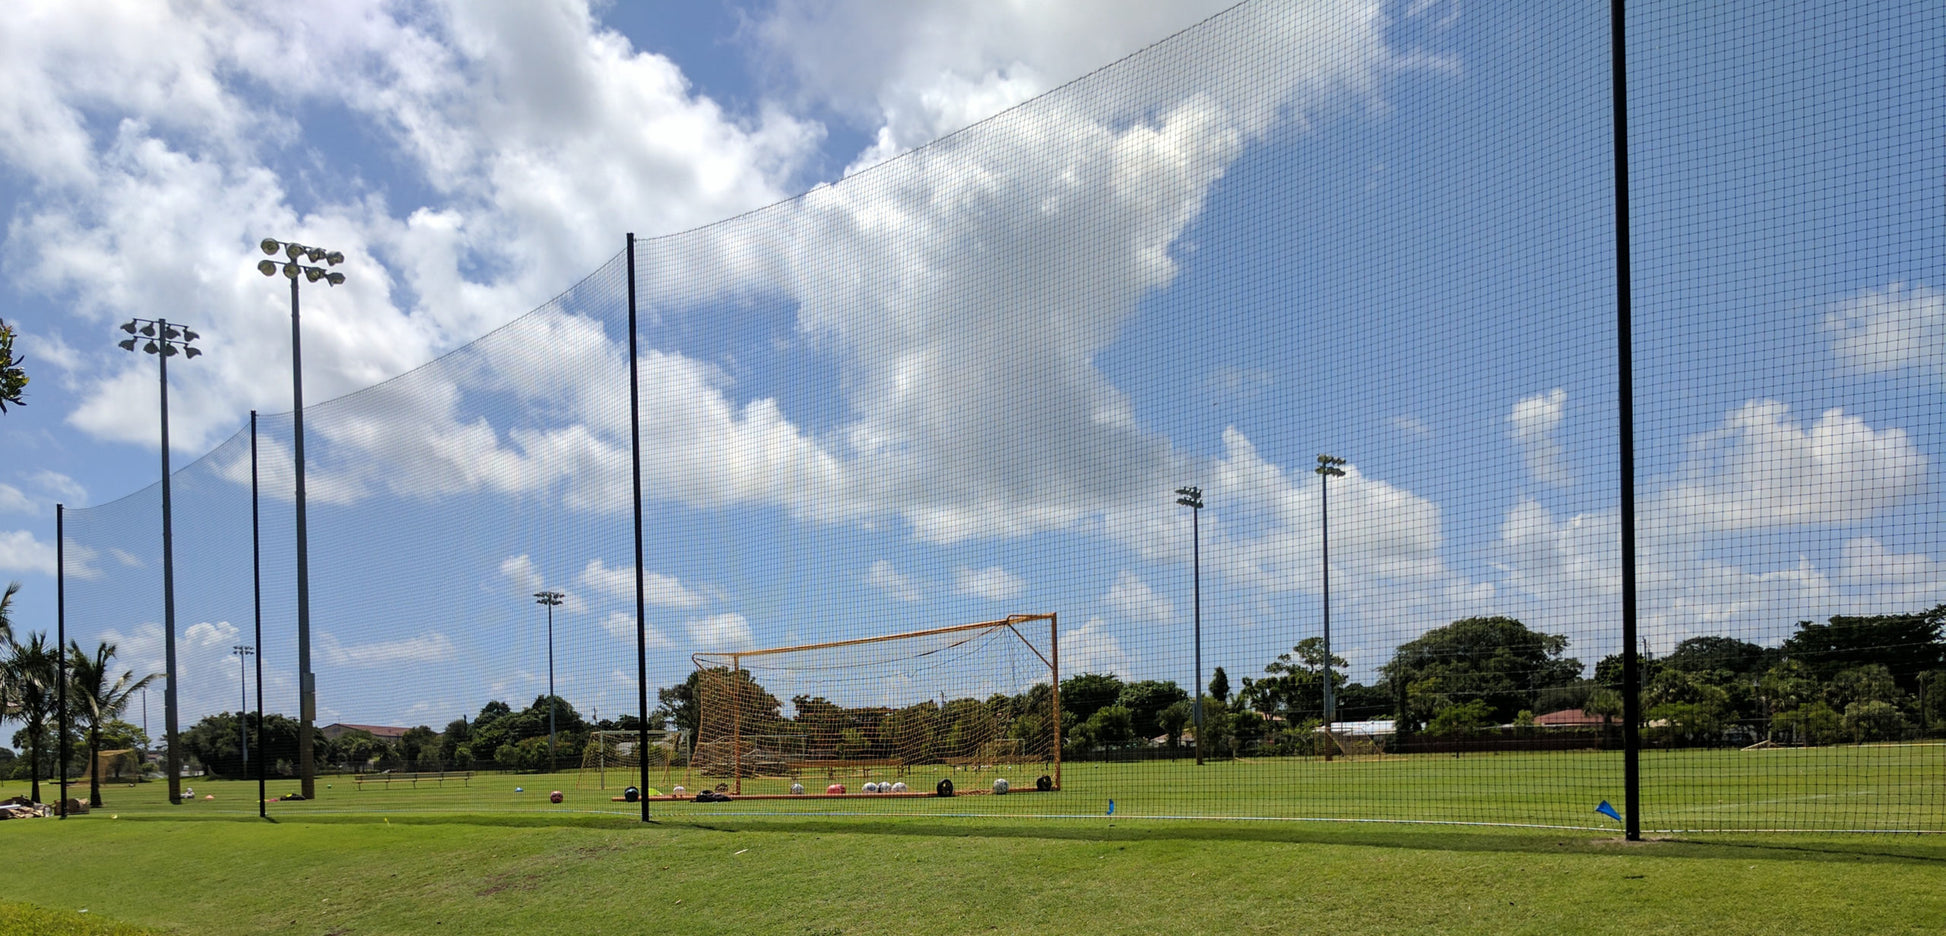 A soccer field with a goal post and some lights